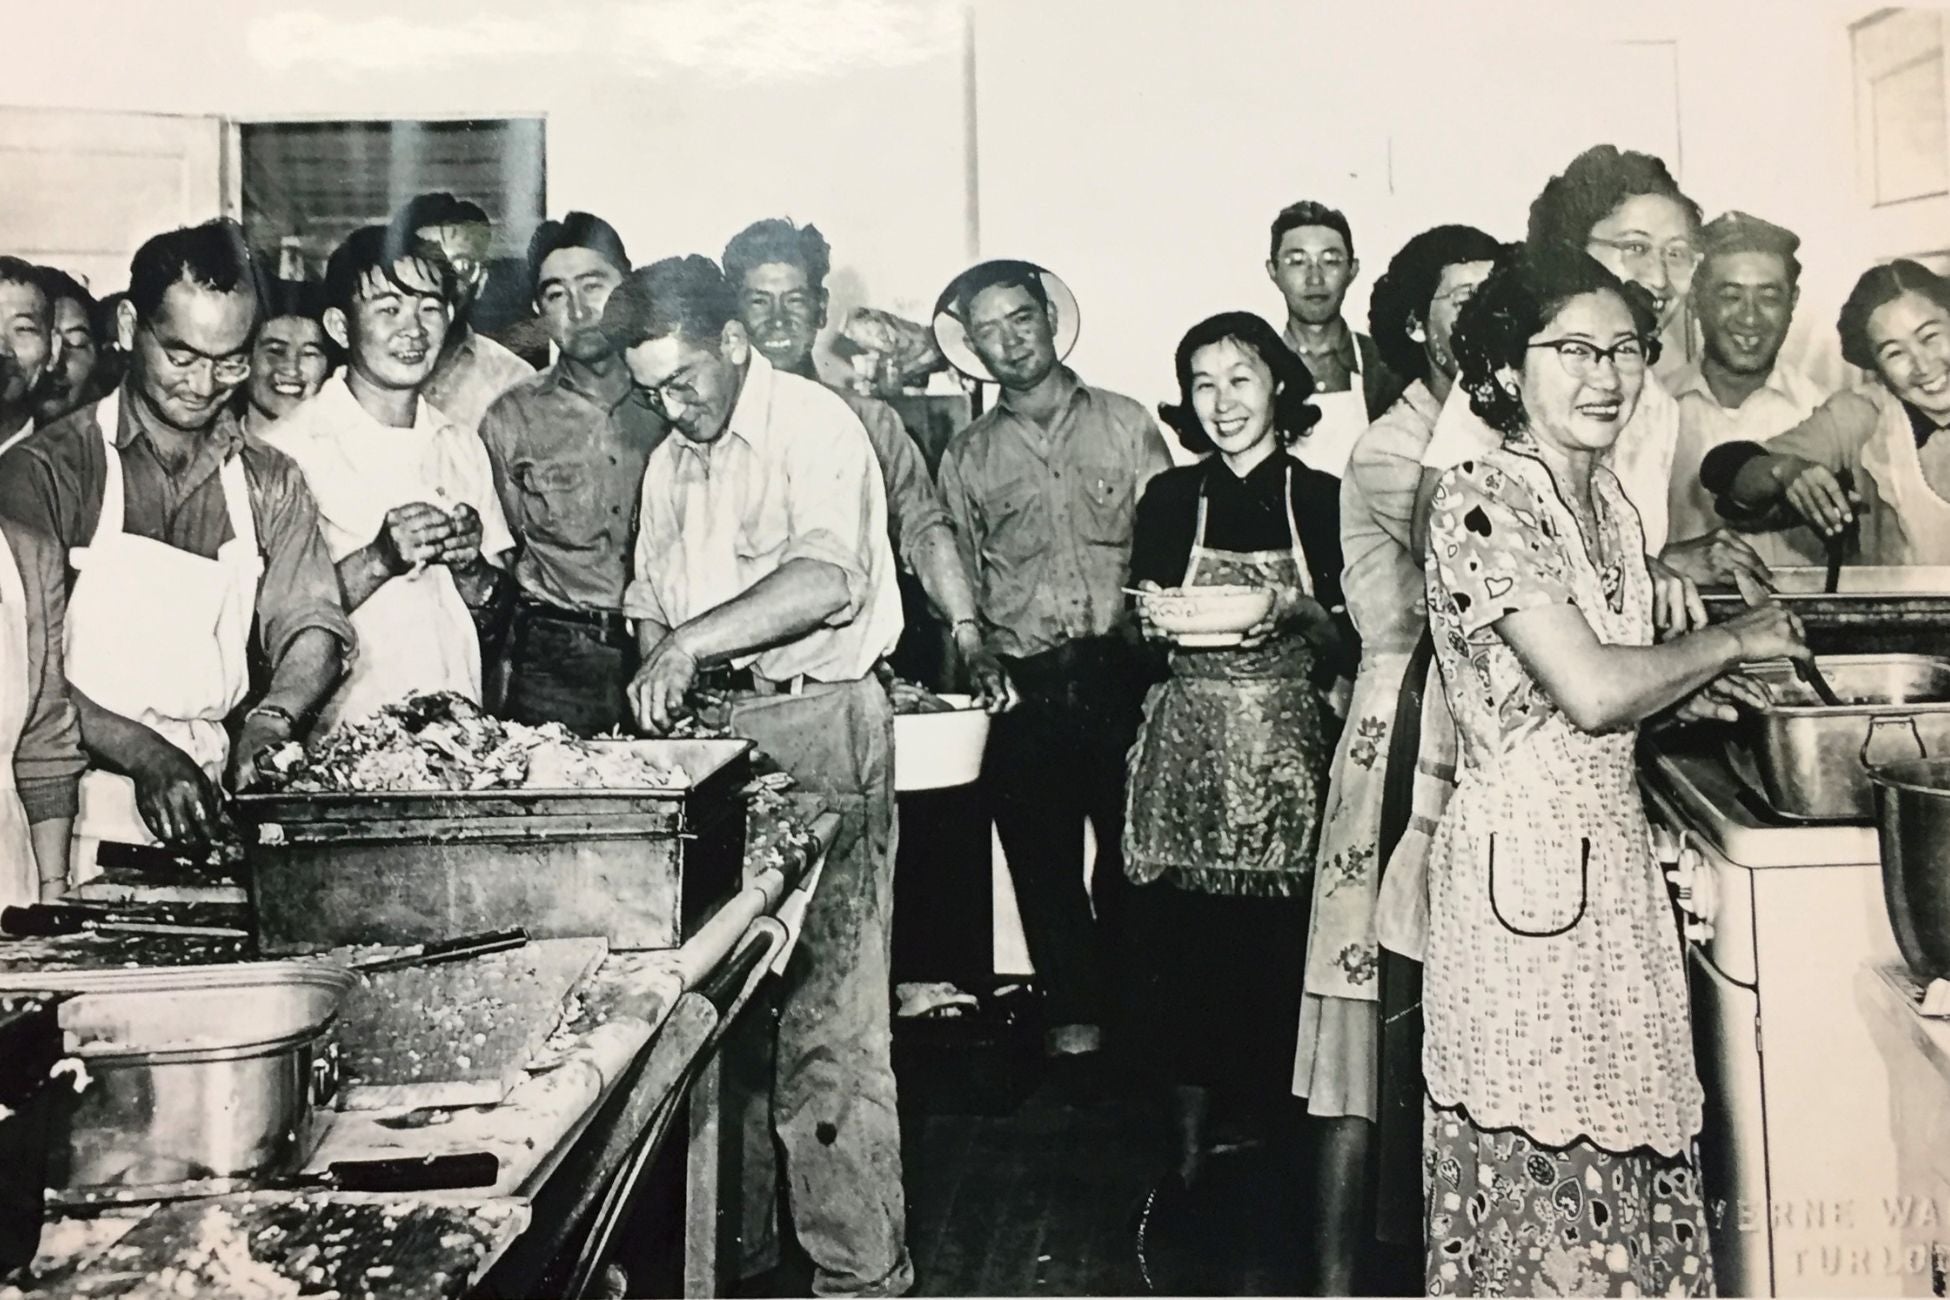 Black-and-white image of about 20 Japanese American men and women preparing meal in shared kitchen